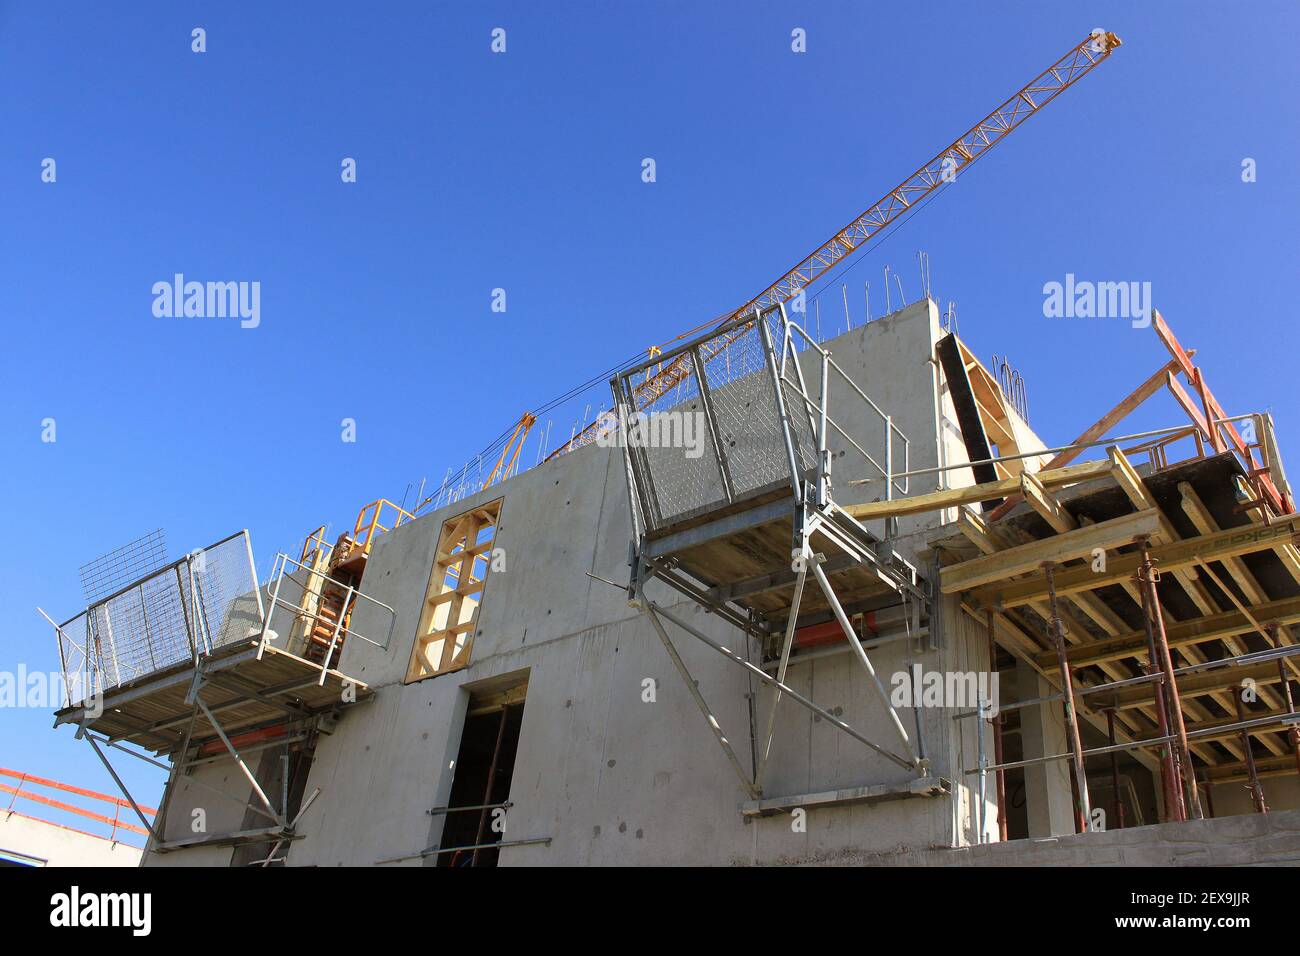 Building Industry Stock Photo